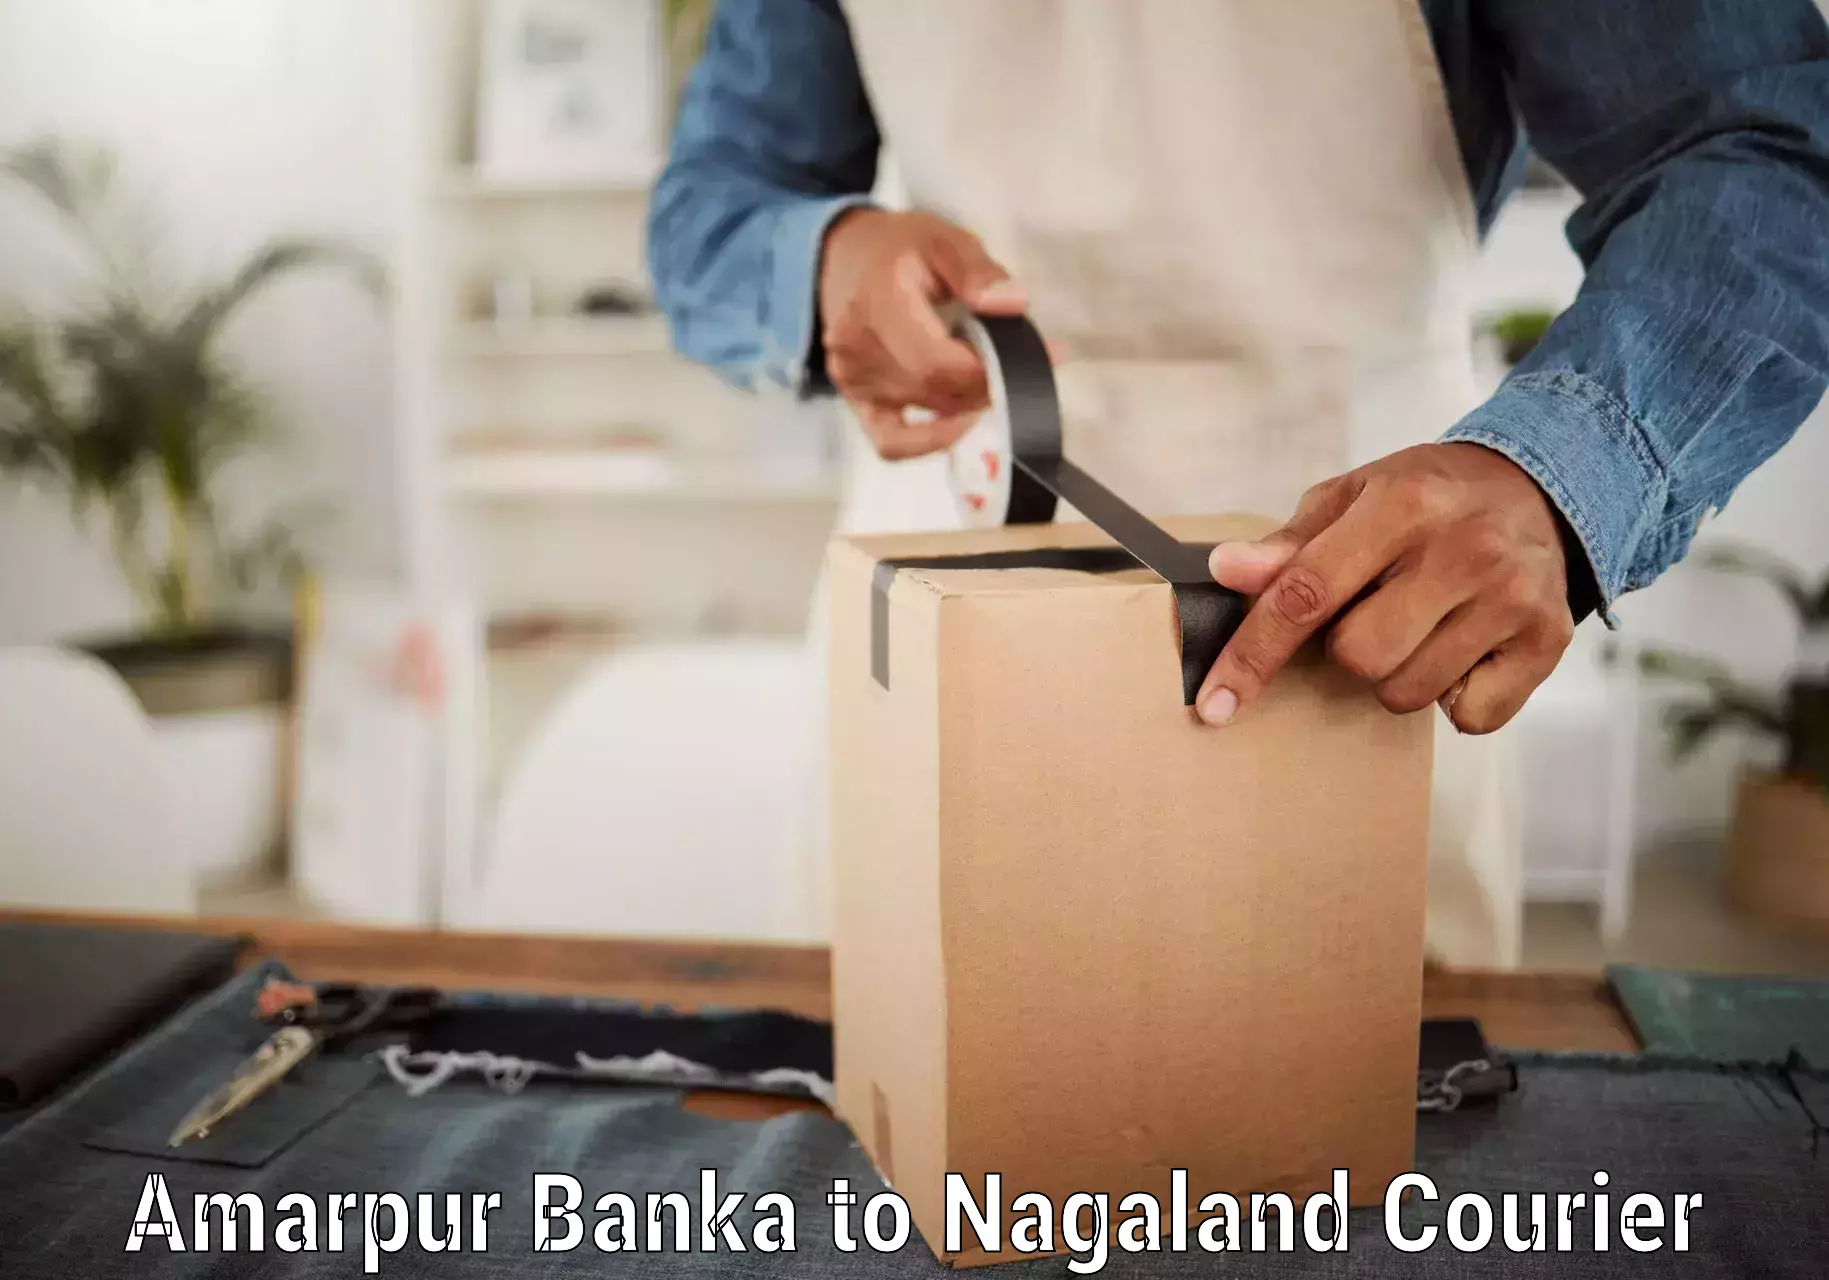 State-of-the-art courier technology Amarpur Banka to Mon